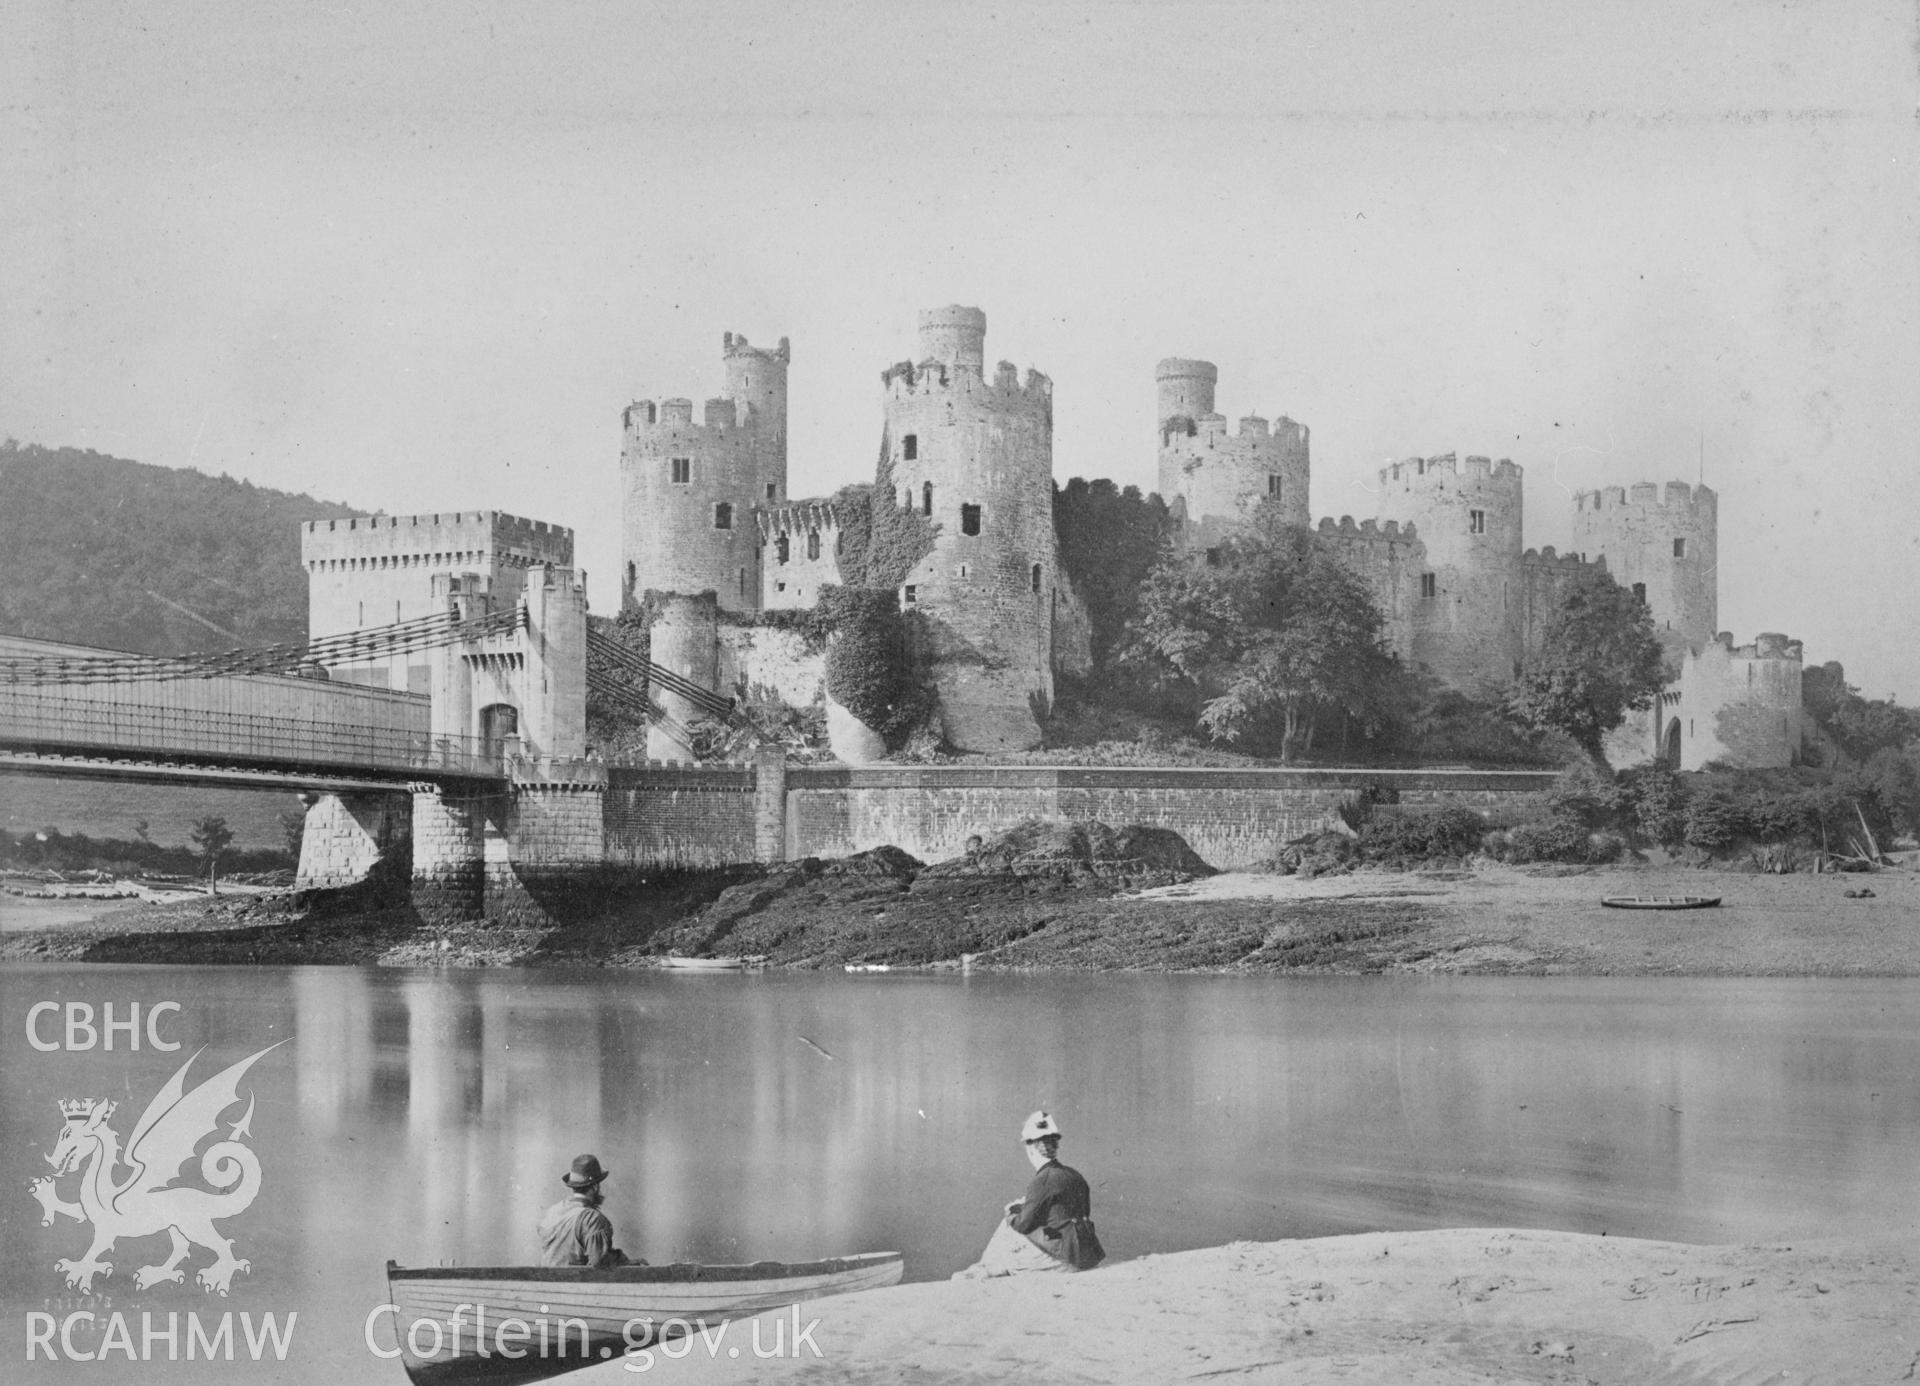 Digital copy of an acetate negative showing Conwy Castle.